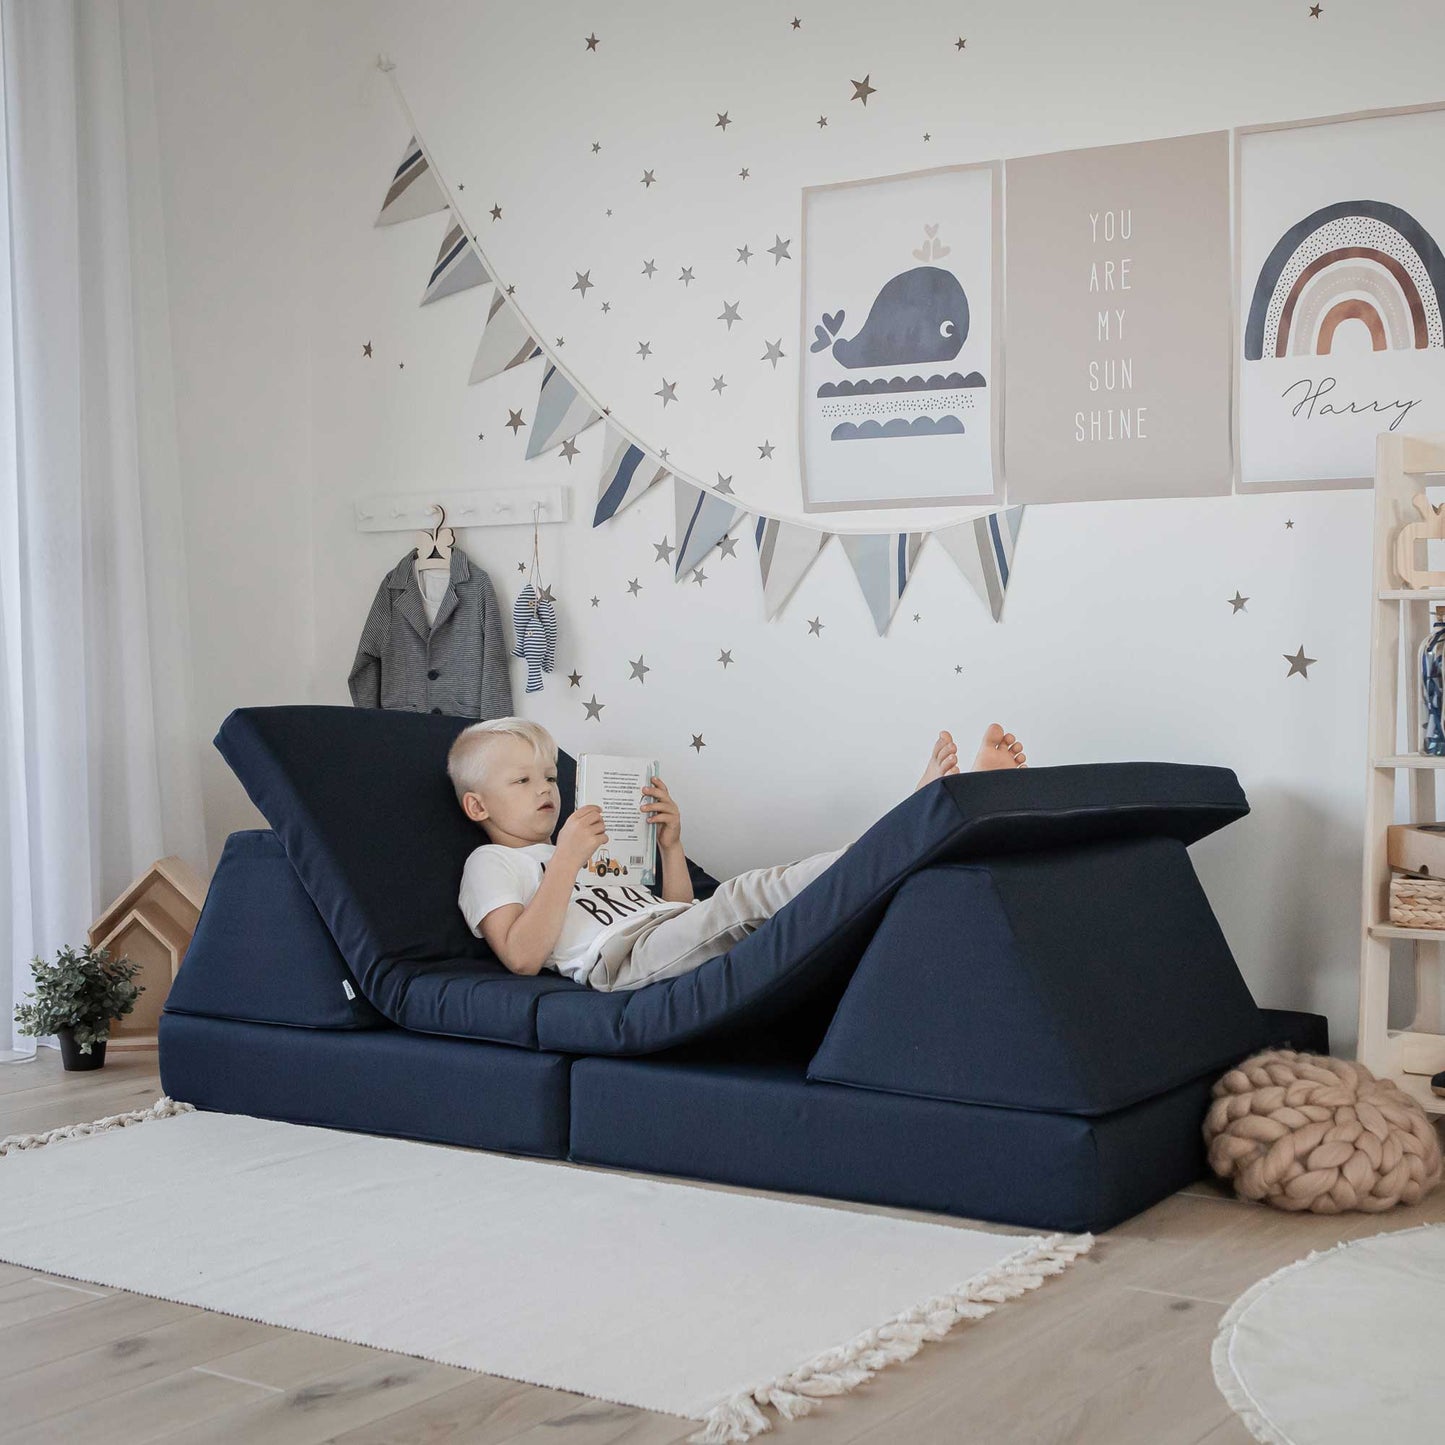 A boy relaxing and reading a book on his navy blue Monboxy play couch set for toddlers